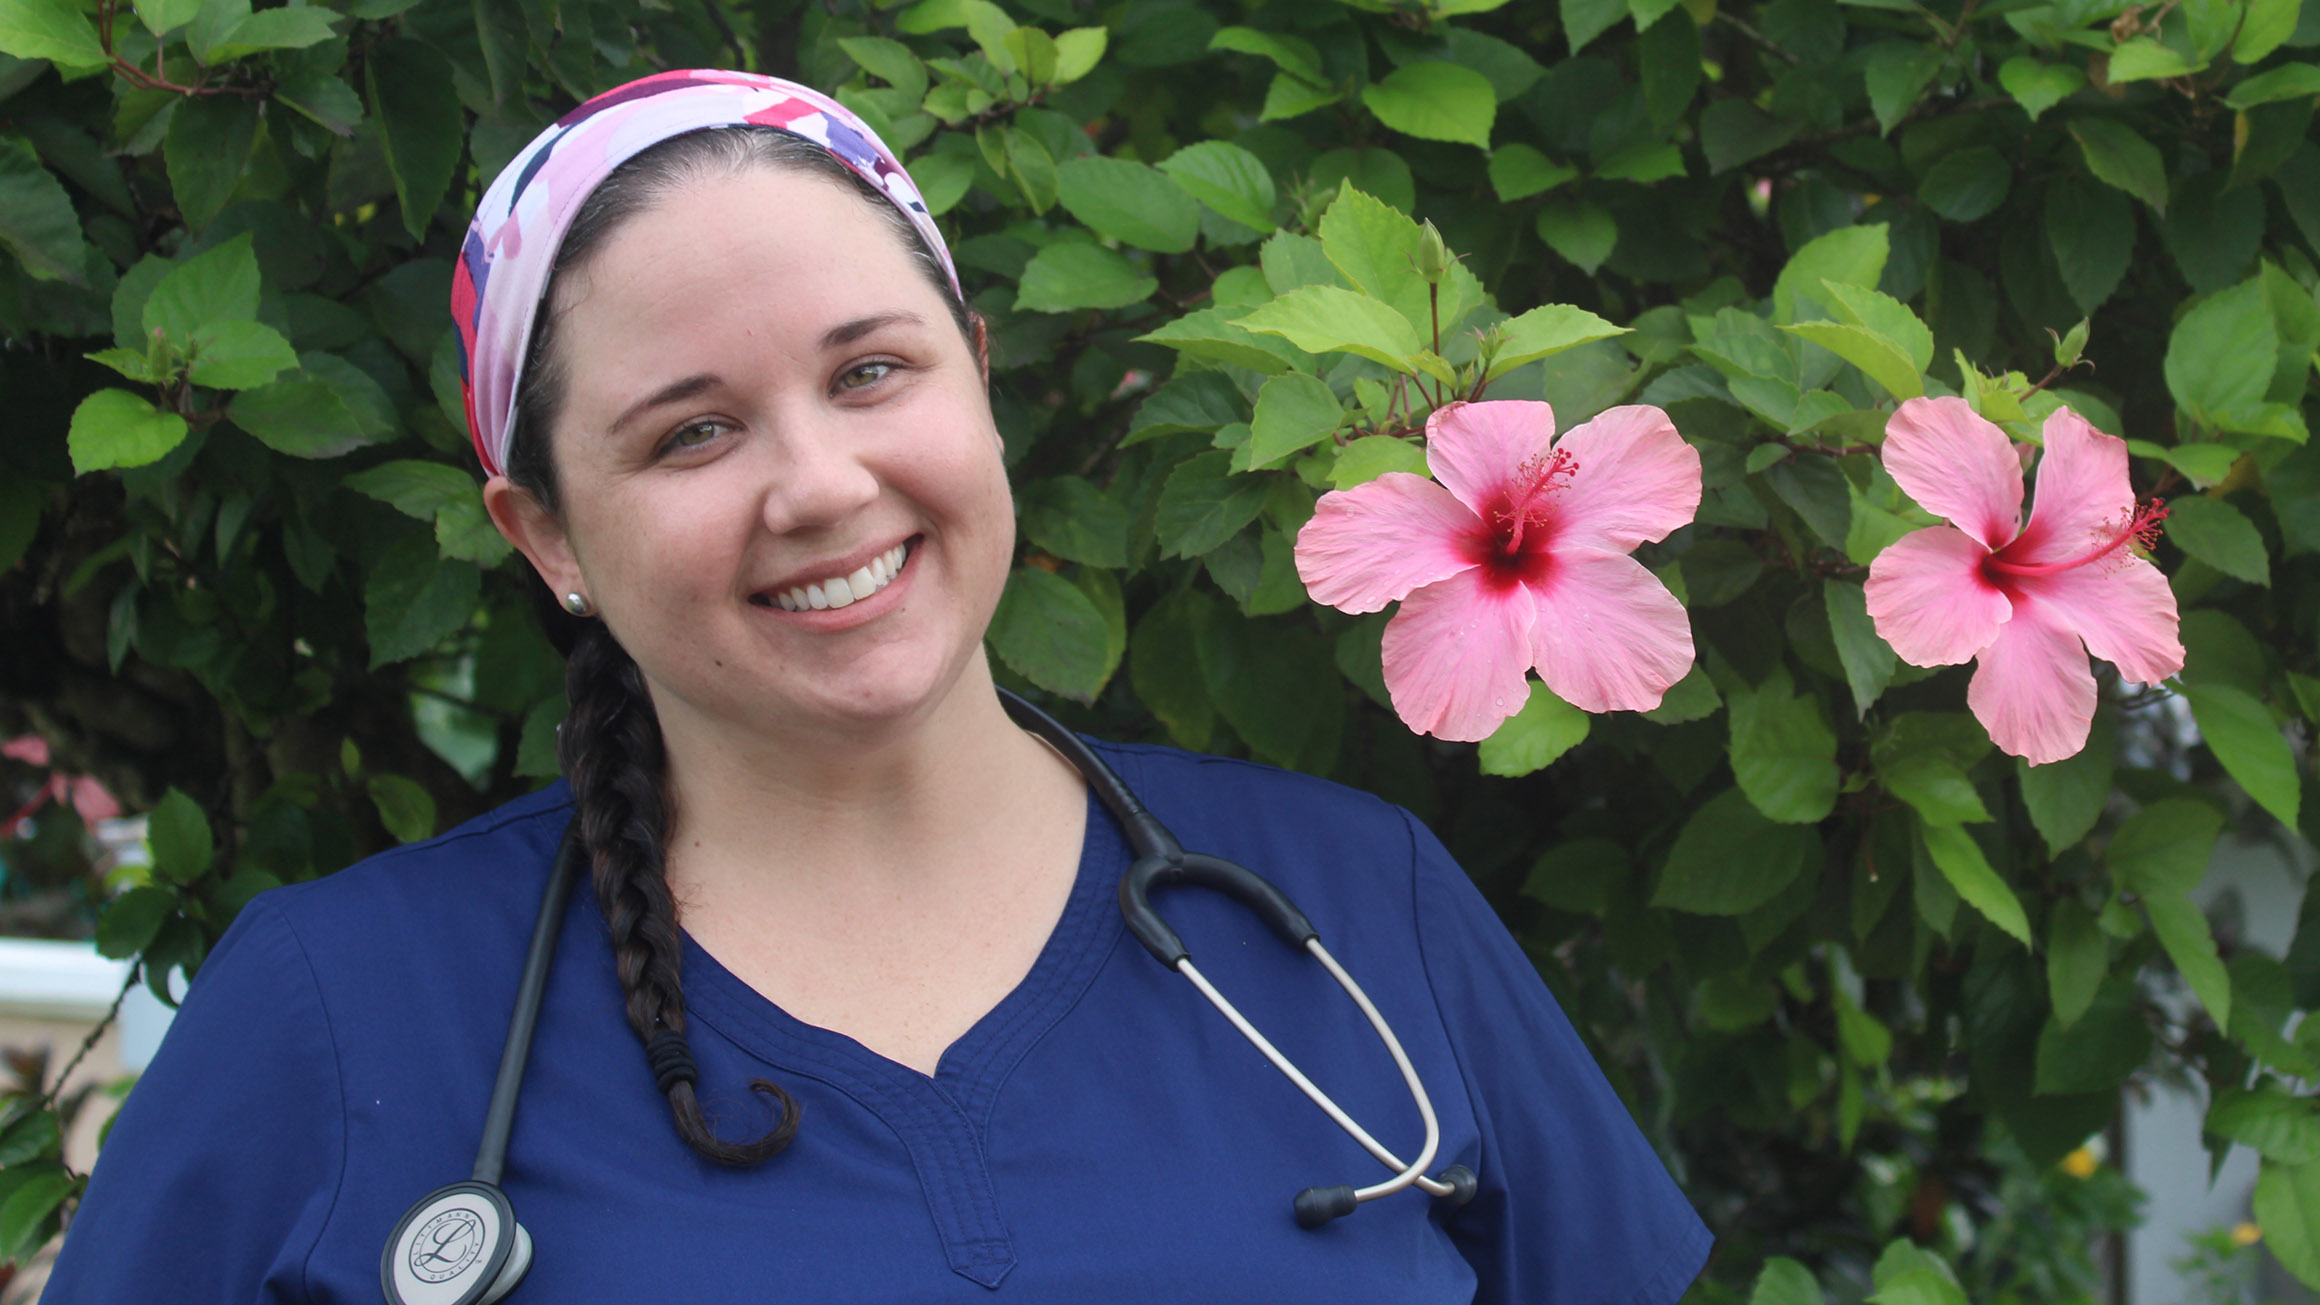 Katie Francis is wearing scrubs standing in front of a green plant with pink flowers